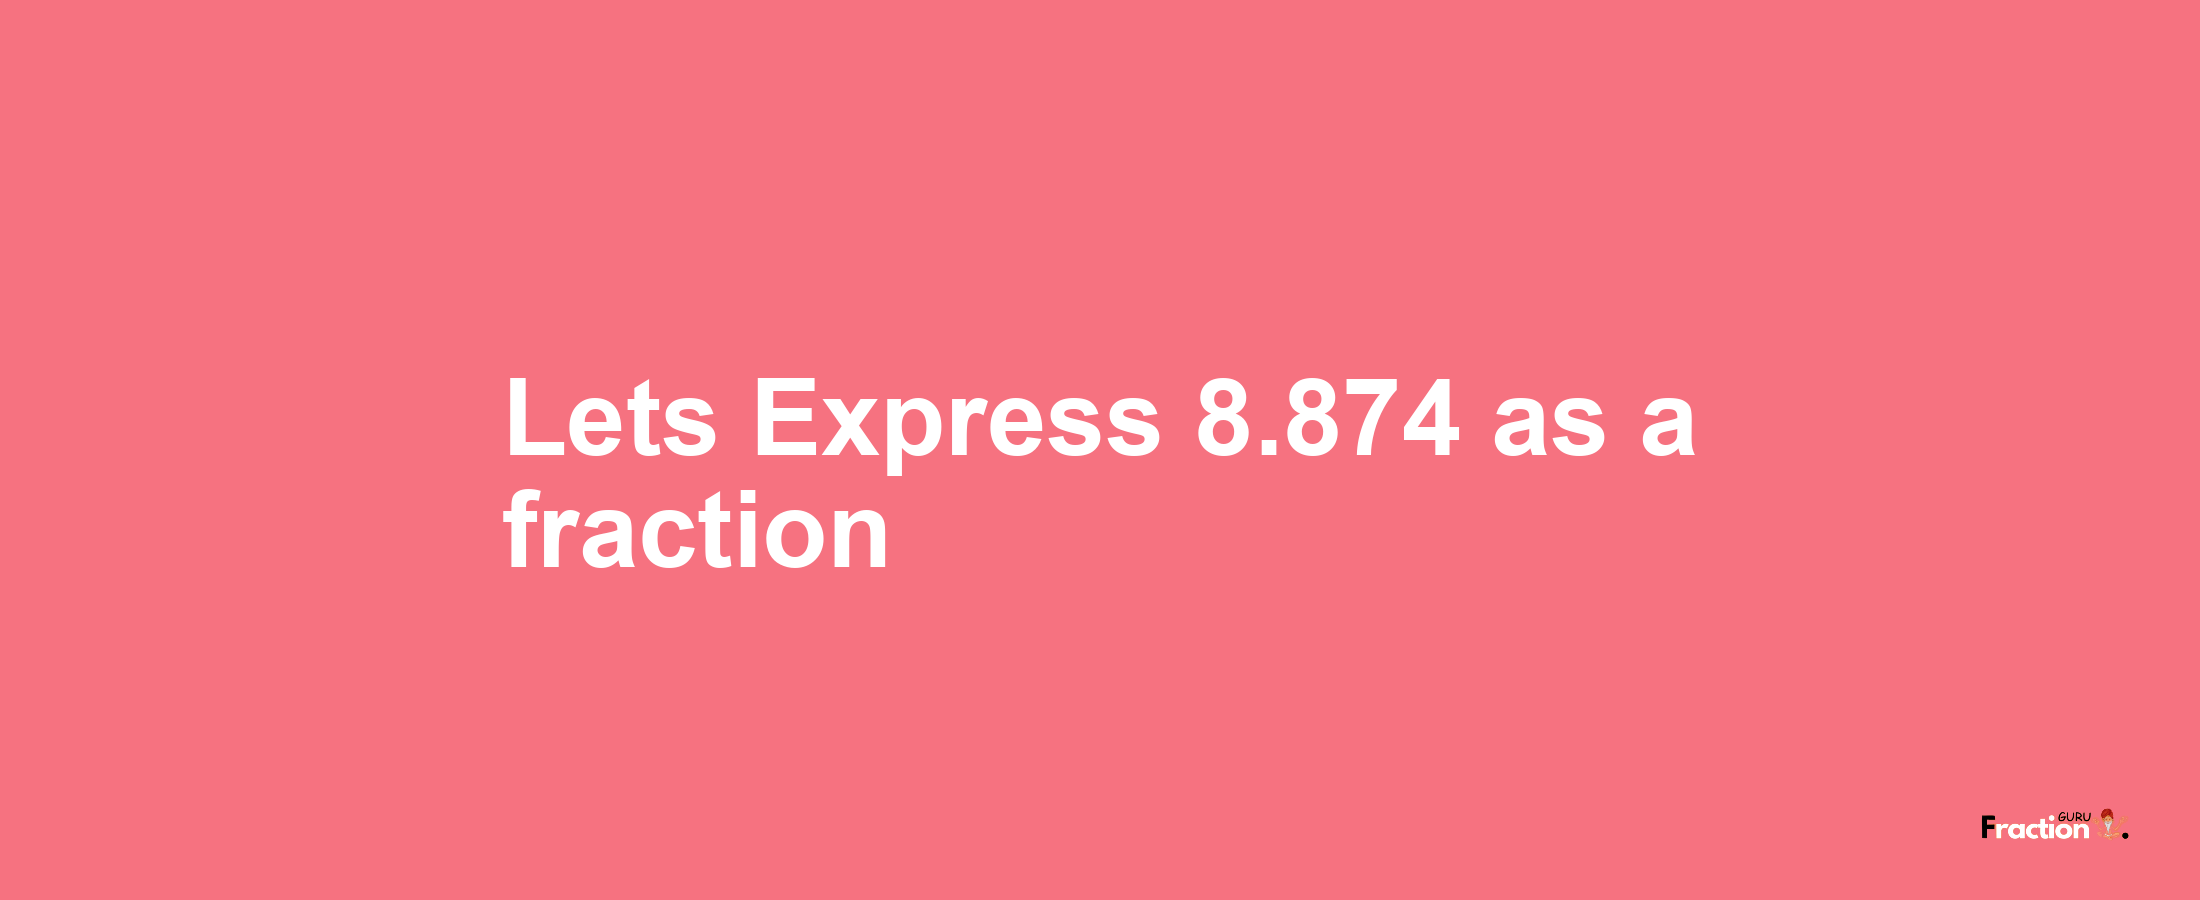 Lets Express 8.874 as afraction